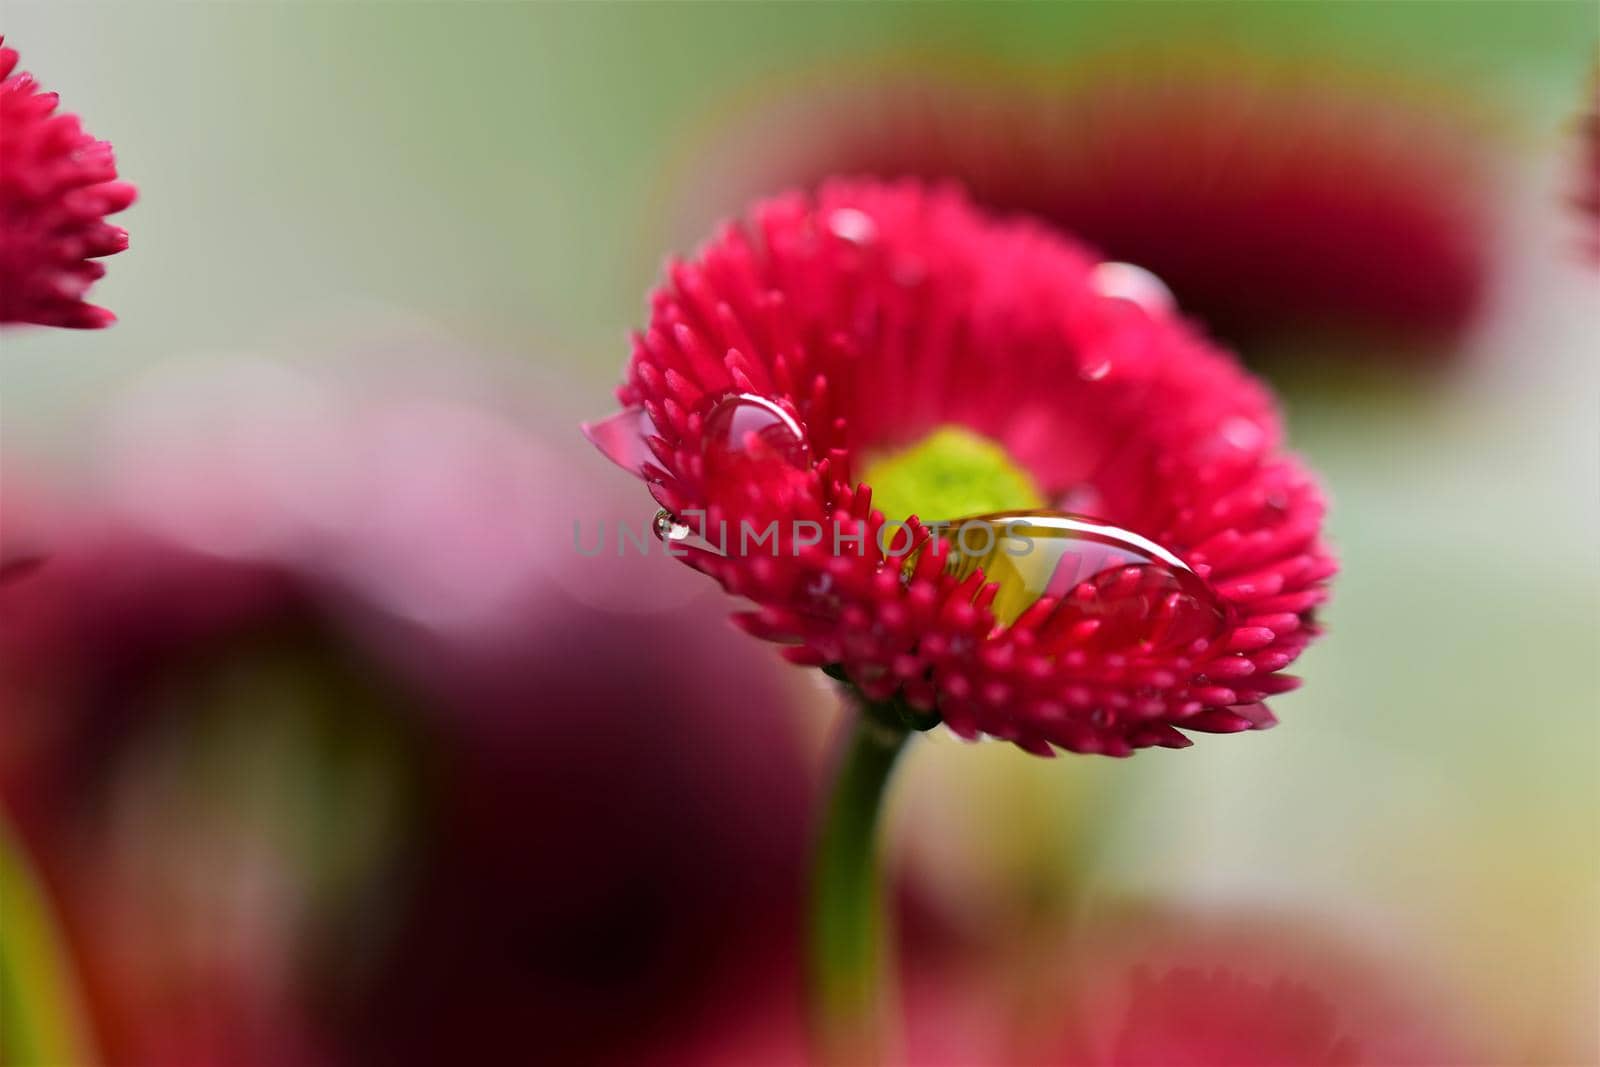 Pink Bellis Perennis after rain as a close up by Luise123